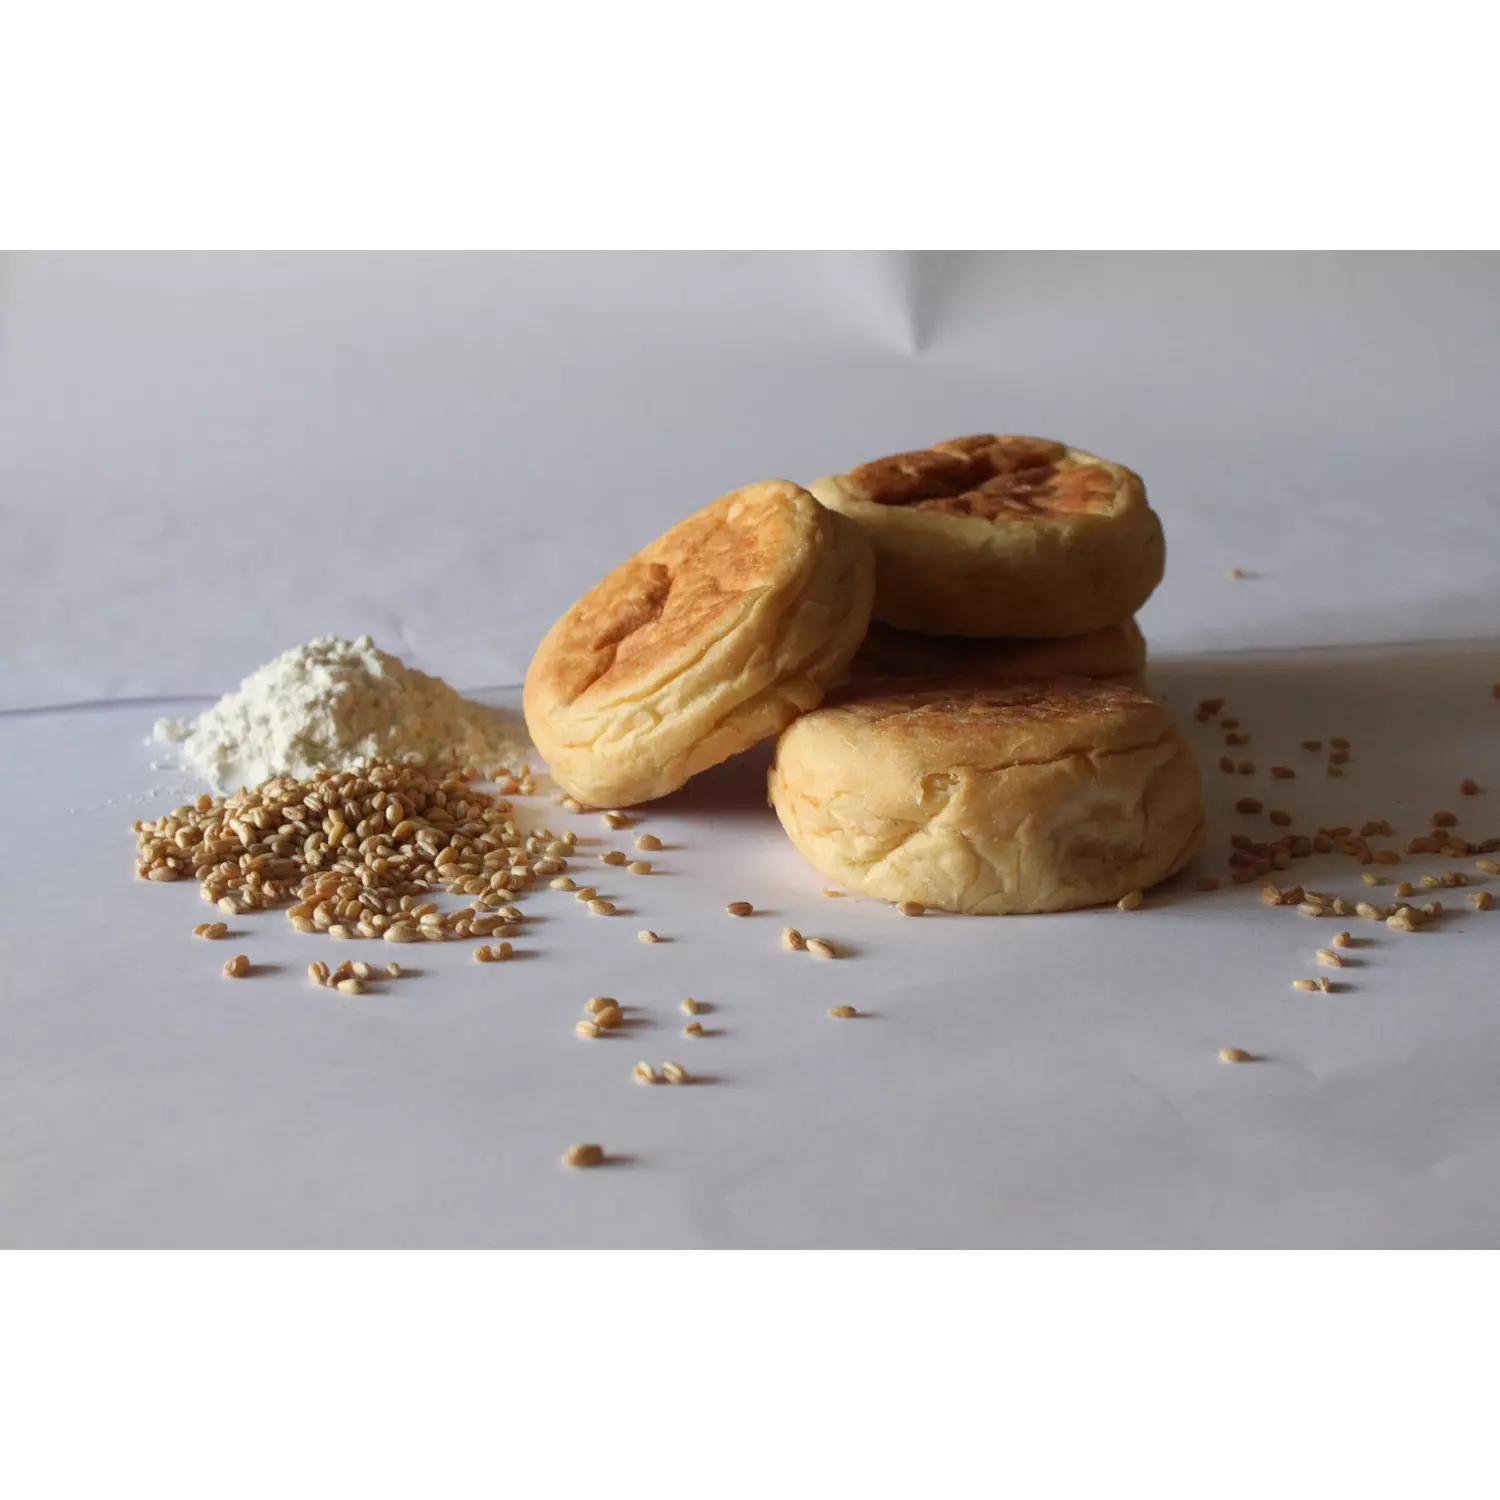 Whole Wheat English Muffins (pack of 4) hover image